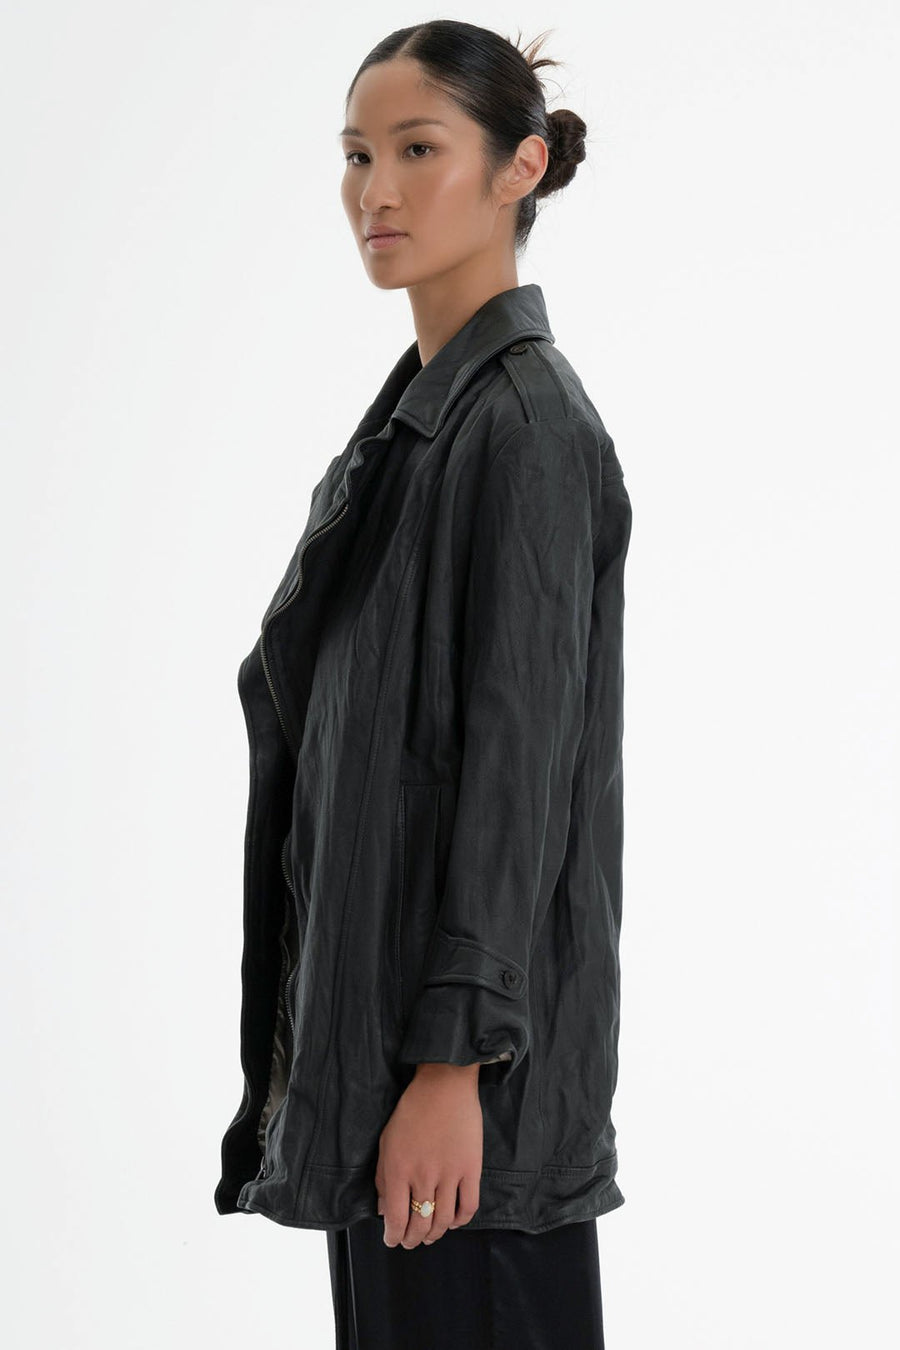 WASHED LEATHER MICRO TRENCH, VINTAGE BLACK - Burning Torch Online Boutique